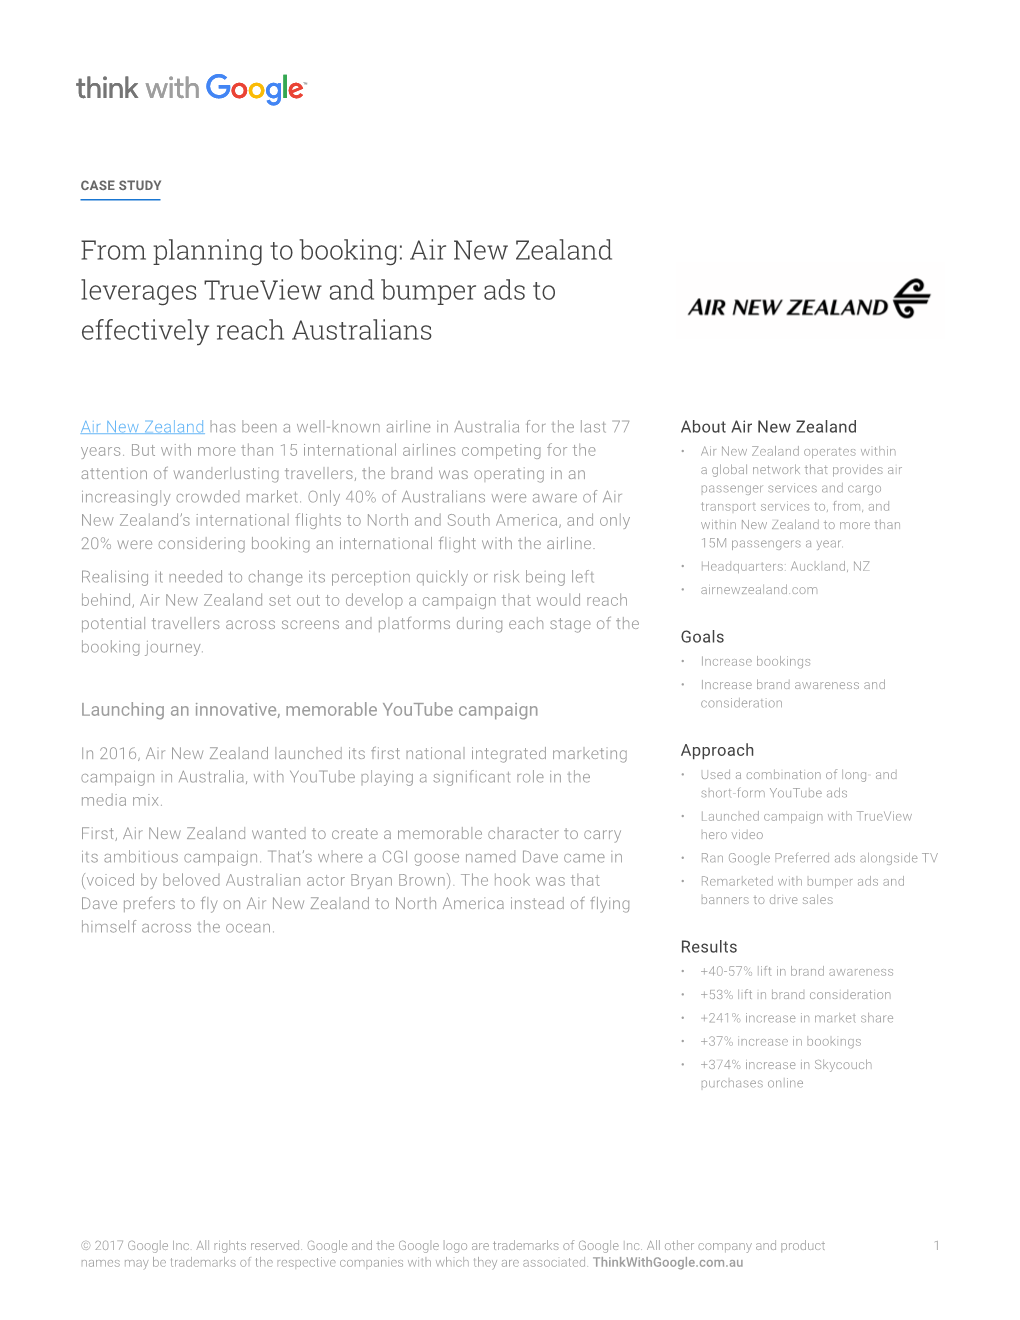 From Planning to Booking: Air New Zealand Leverages Trueview and Bumper Ads to Effectively Reach Australians